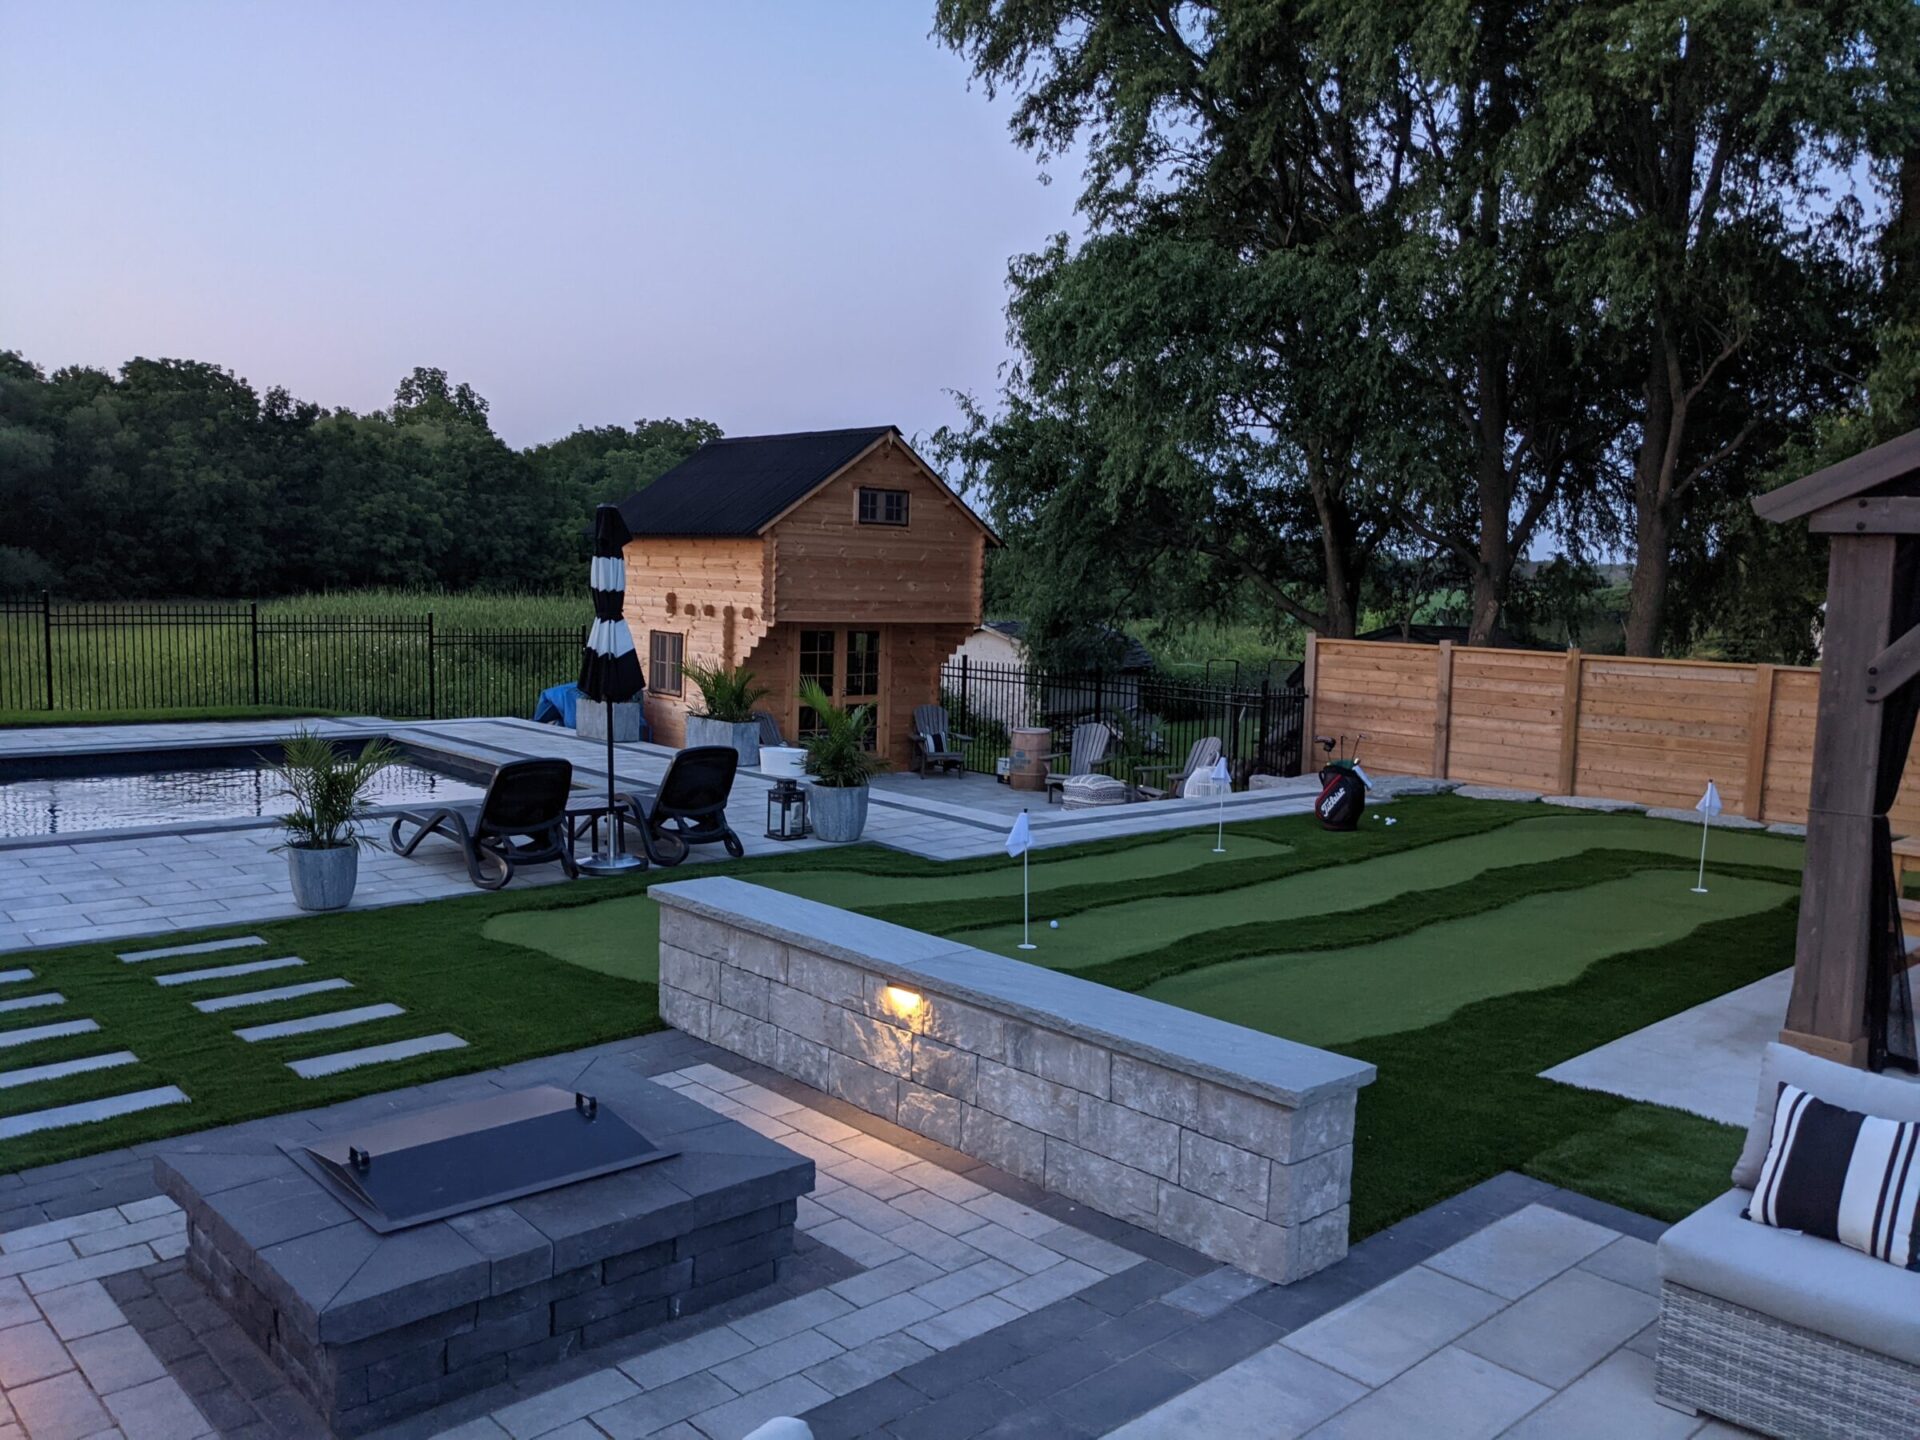 An outdoor space at dusk featuring a rectangular pool, artificial putting green, a fire pit, seating areas, and a wooden shed. A person is visible.